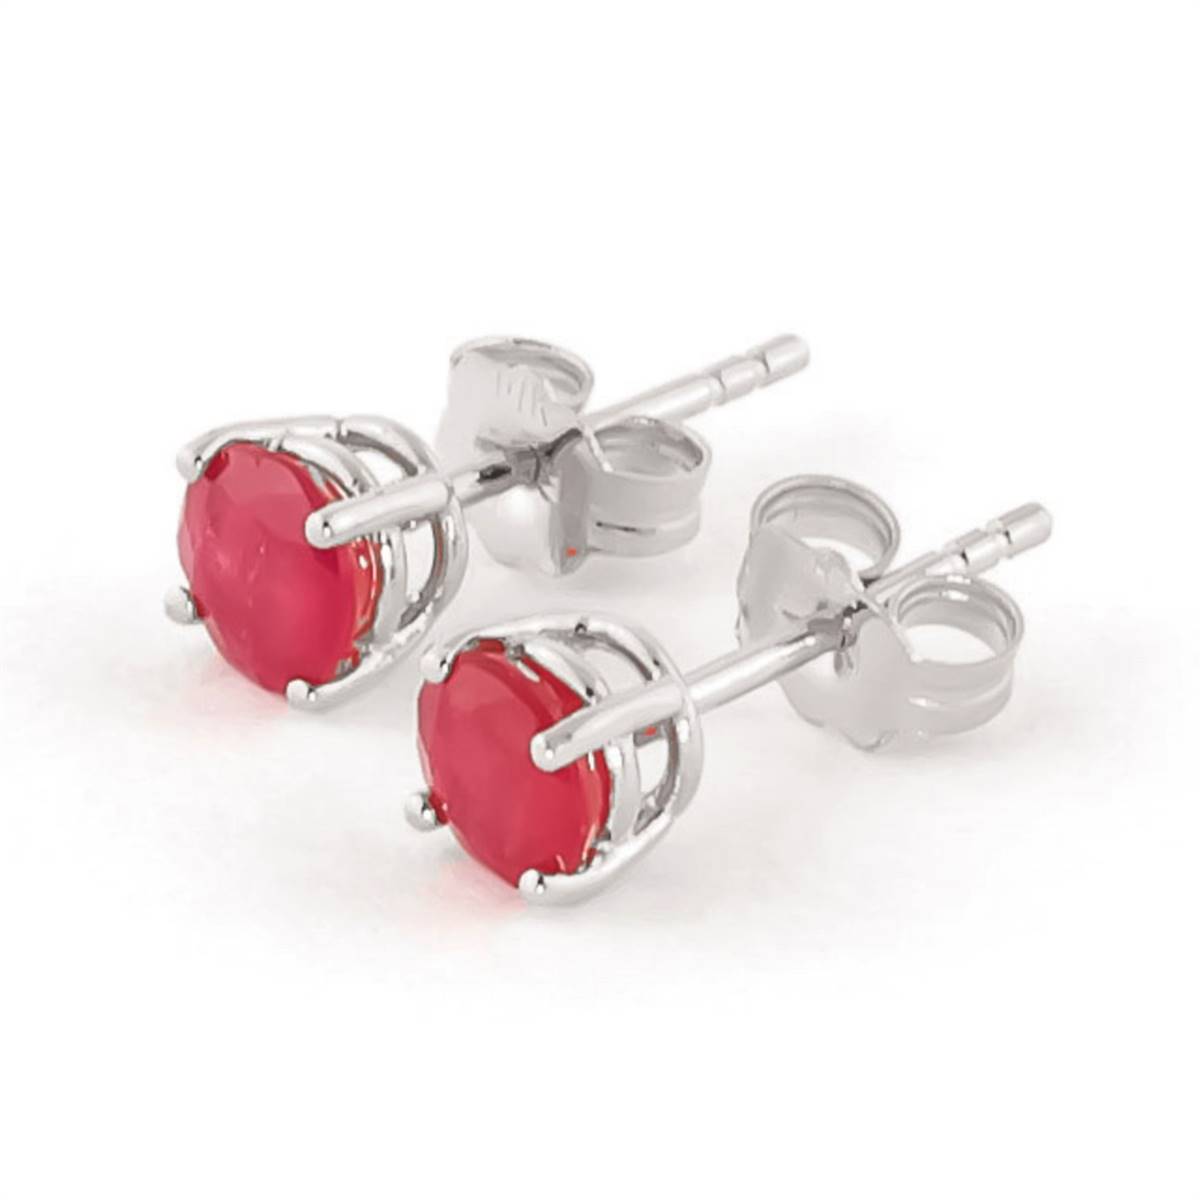 0.95 Carat 14K Solid White Gold Kiss Goodnight Ruby Earrings